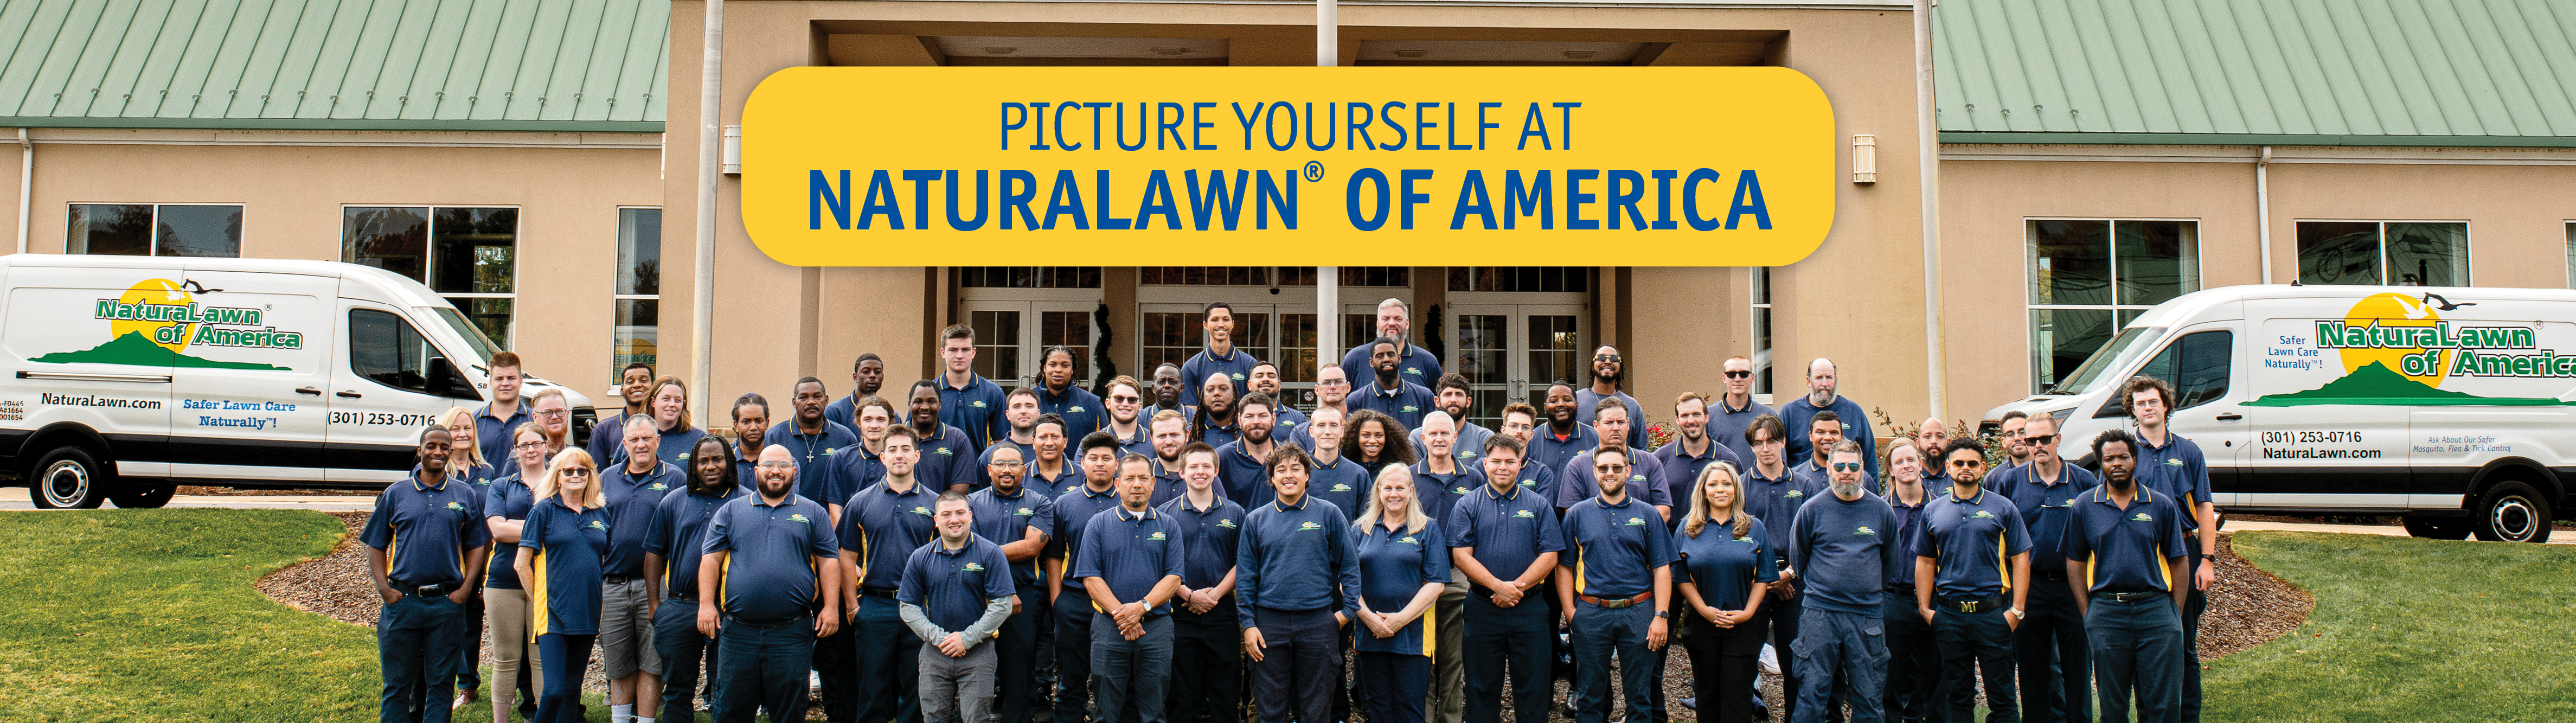 Picture Yourself at NaturaLawn of America